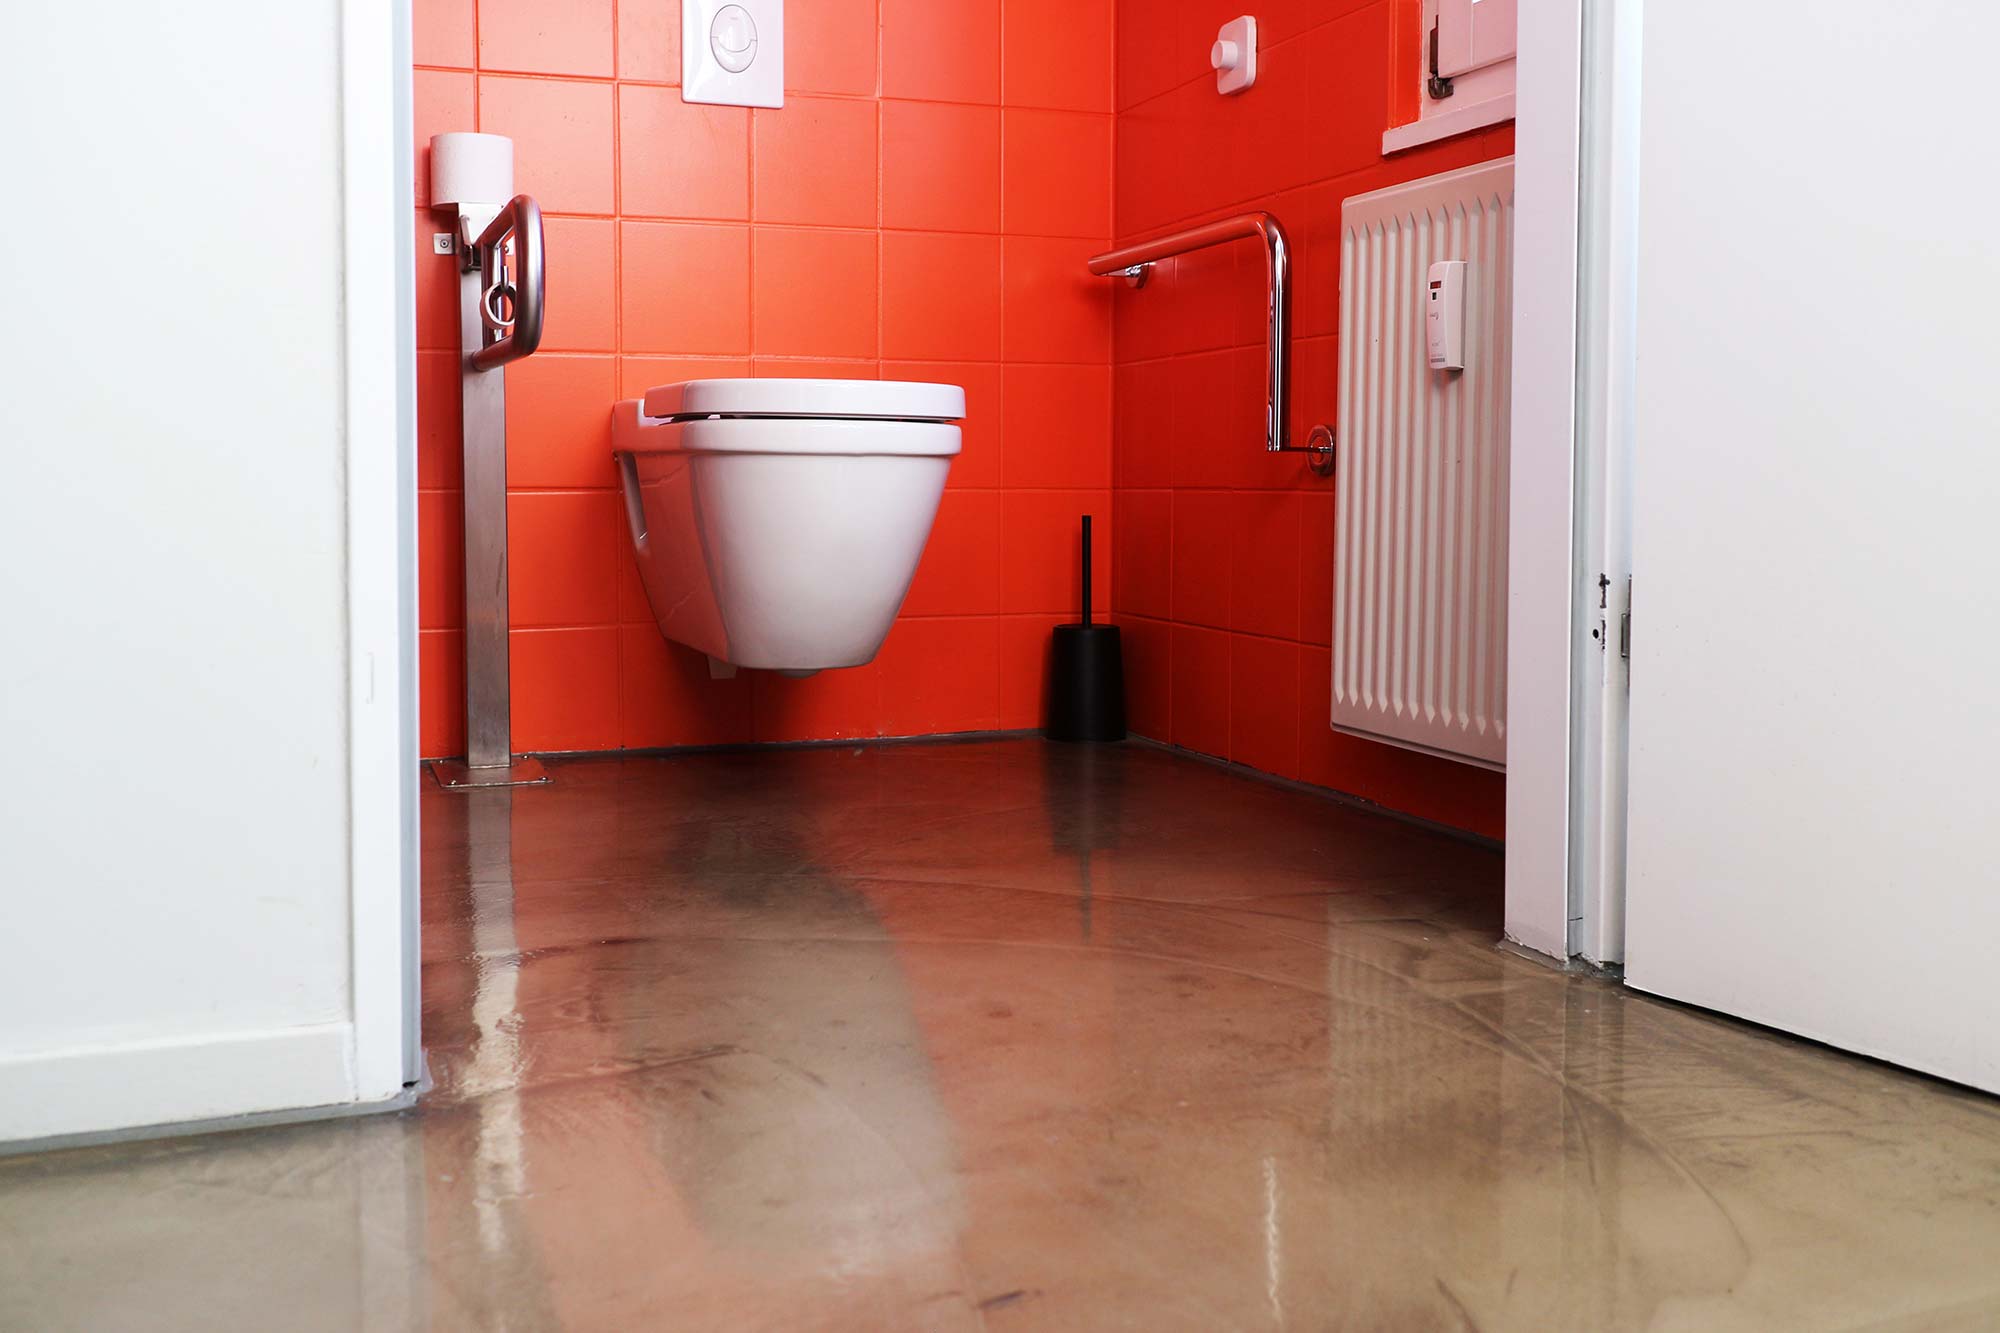 The wide white door to the accessible toilet is open and shows the white toilet next to which there are two silver safety trails; the wall is tiled in a bright orange and the floor has a shiny beige color; on the right side on the wall just behind the door is a small white radiator